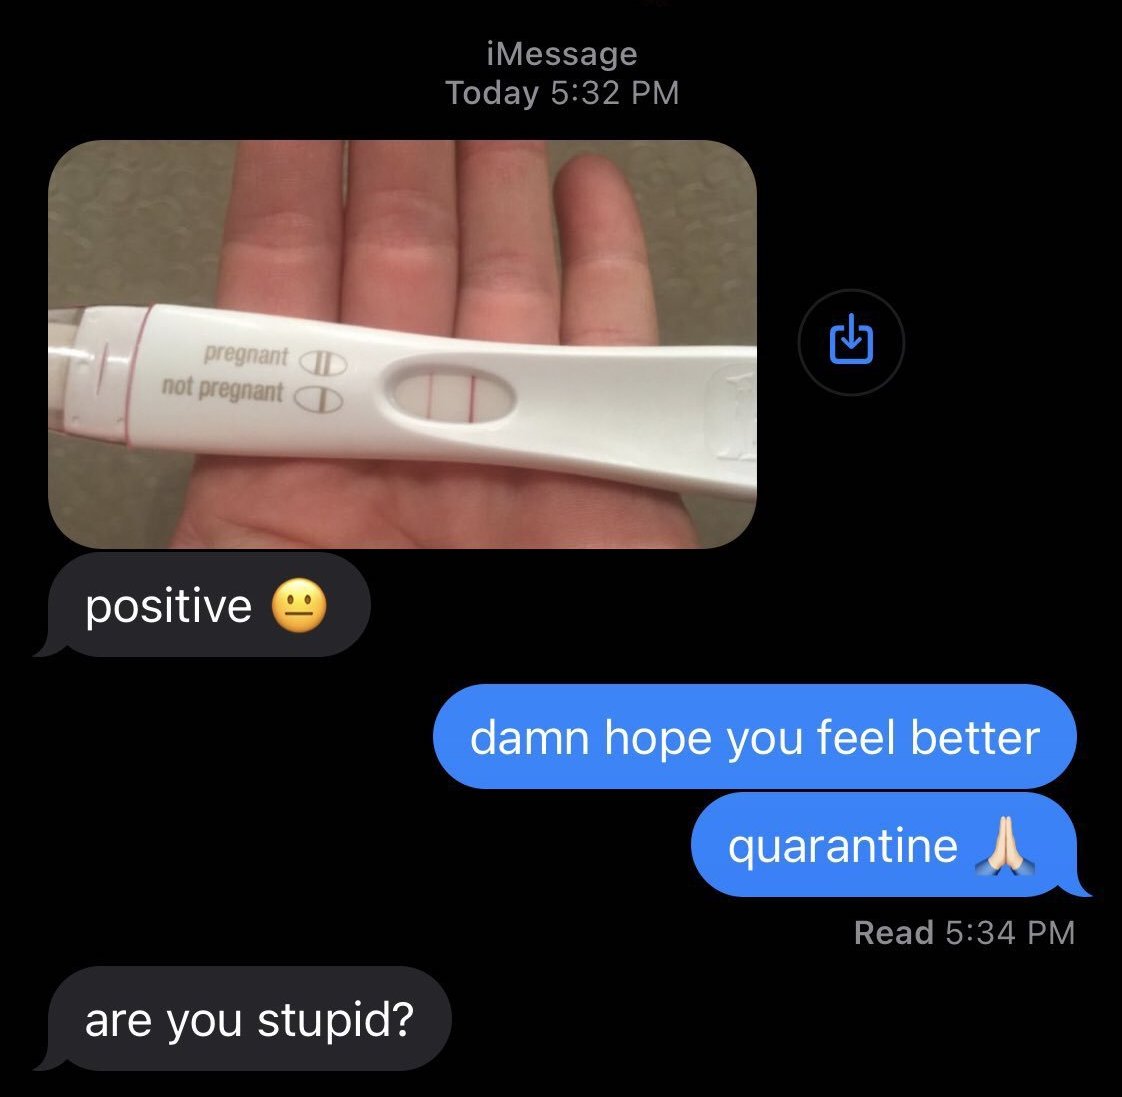 Painful Pictures - pregnancy test covid meme - pregnant D not pregnant positive are you stupid? iMessage Today damn hope you feel better quarantine Read